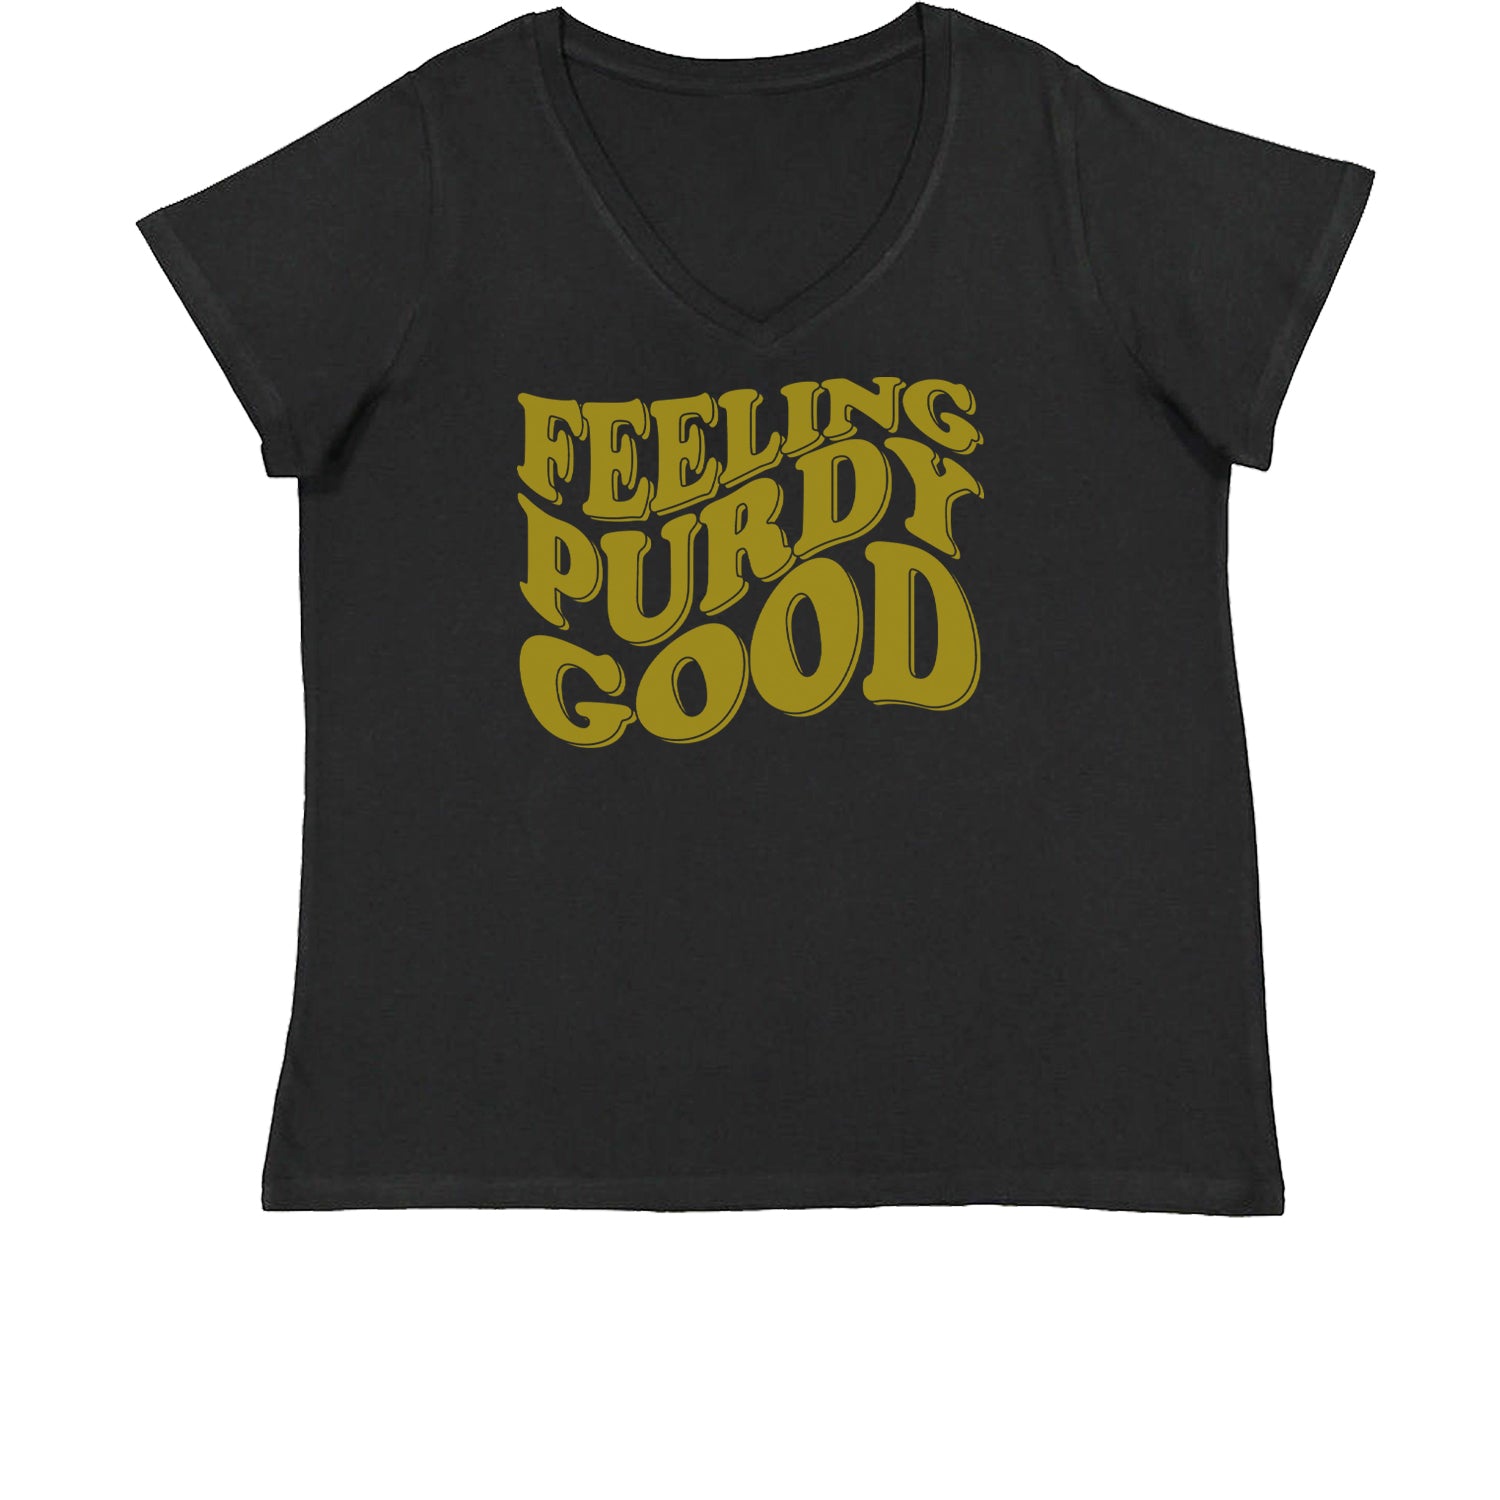 Feeling Purdy Good Womens Plus Size V-Neck T-shirt 13, football by Expression Tees